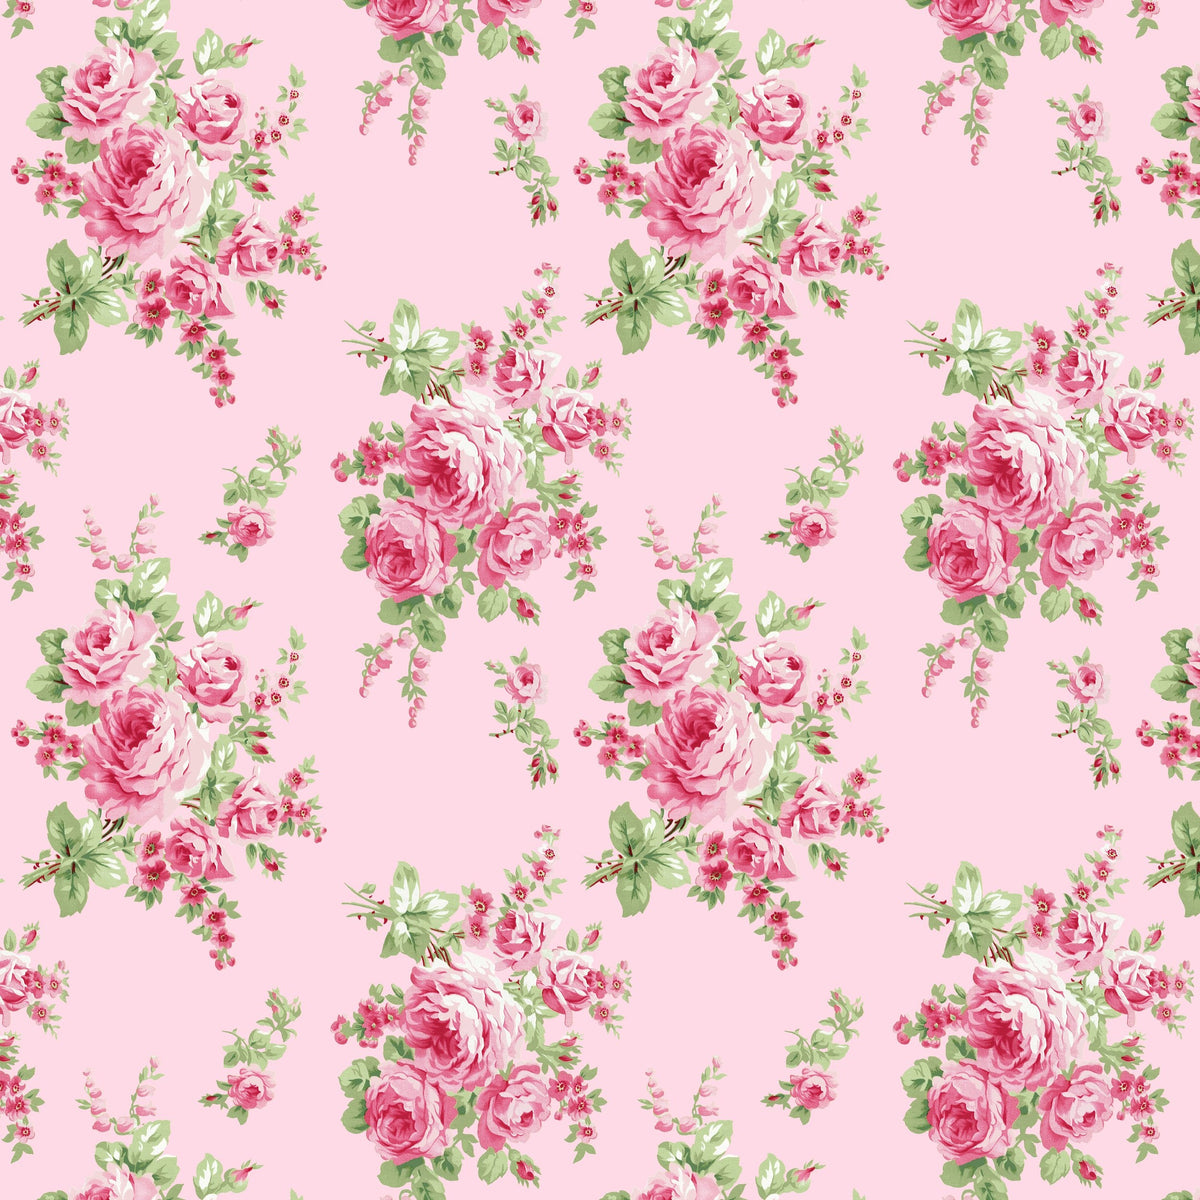 Barefoot Roses Classics: Large Floral